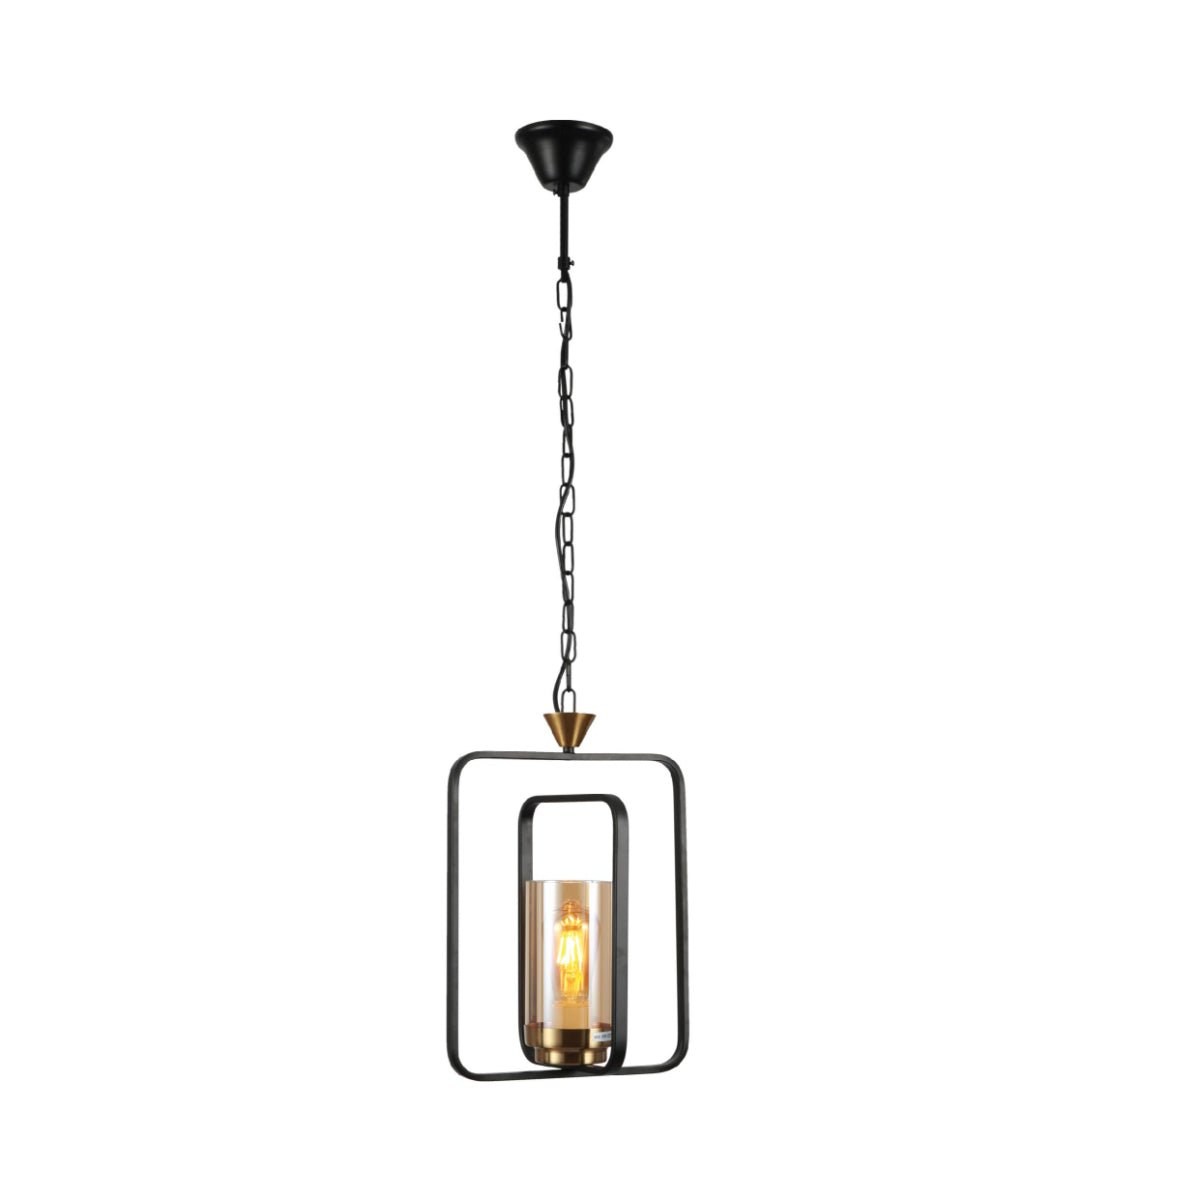 Main image of Black Metal Cage Body Amber Cylinder Glass Pendant Ceiling Light with E27 Fitting | TEKLED 159-17440